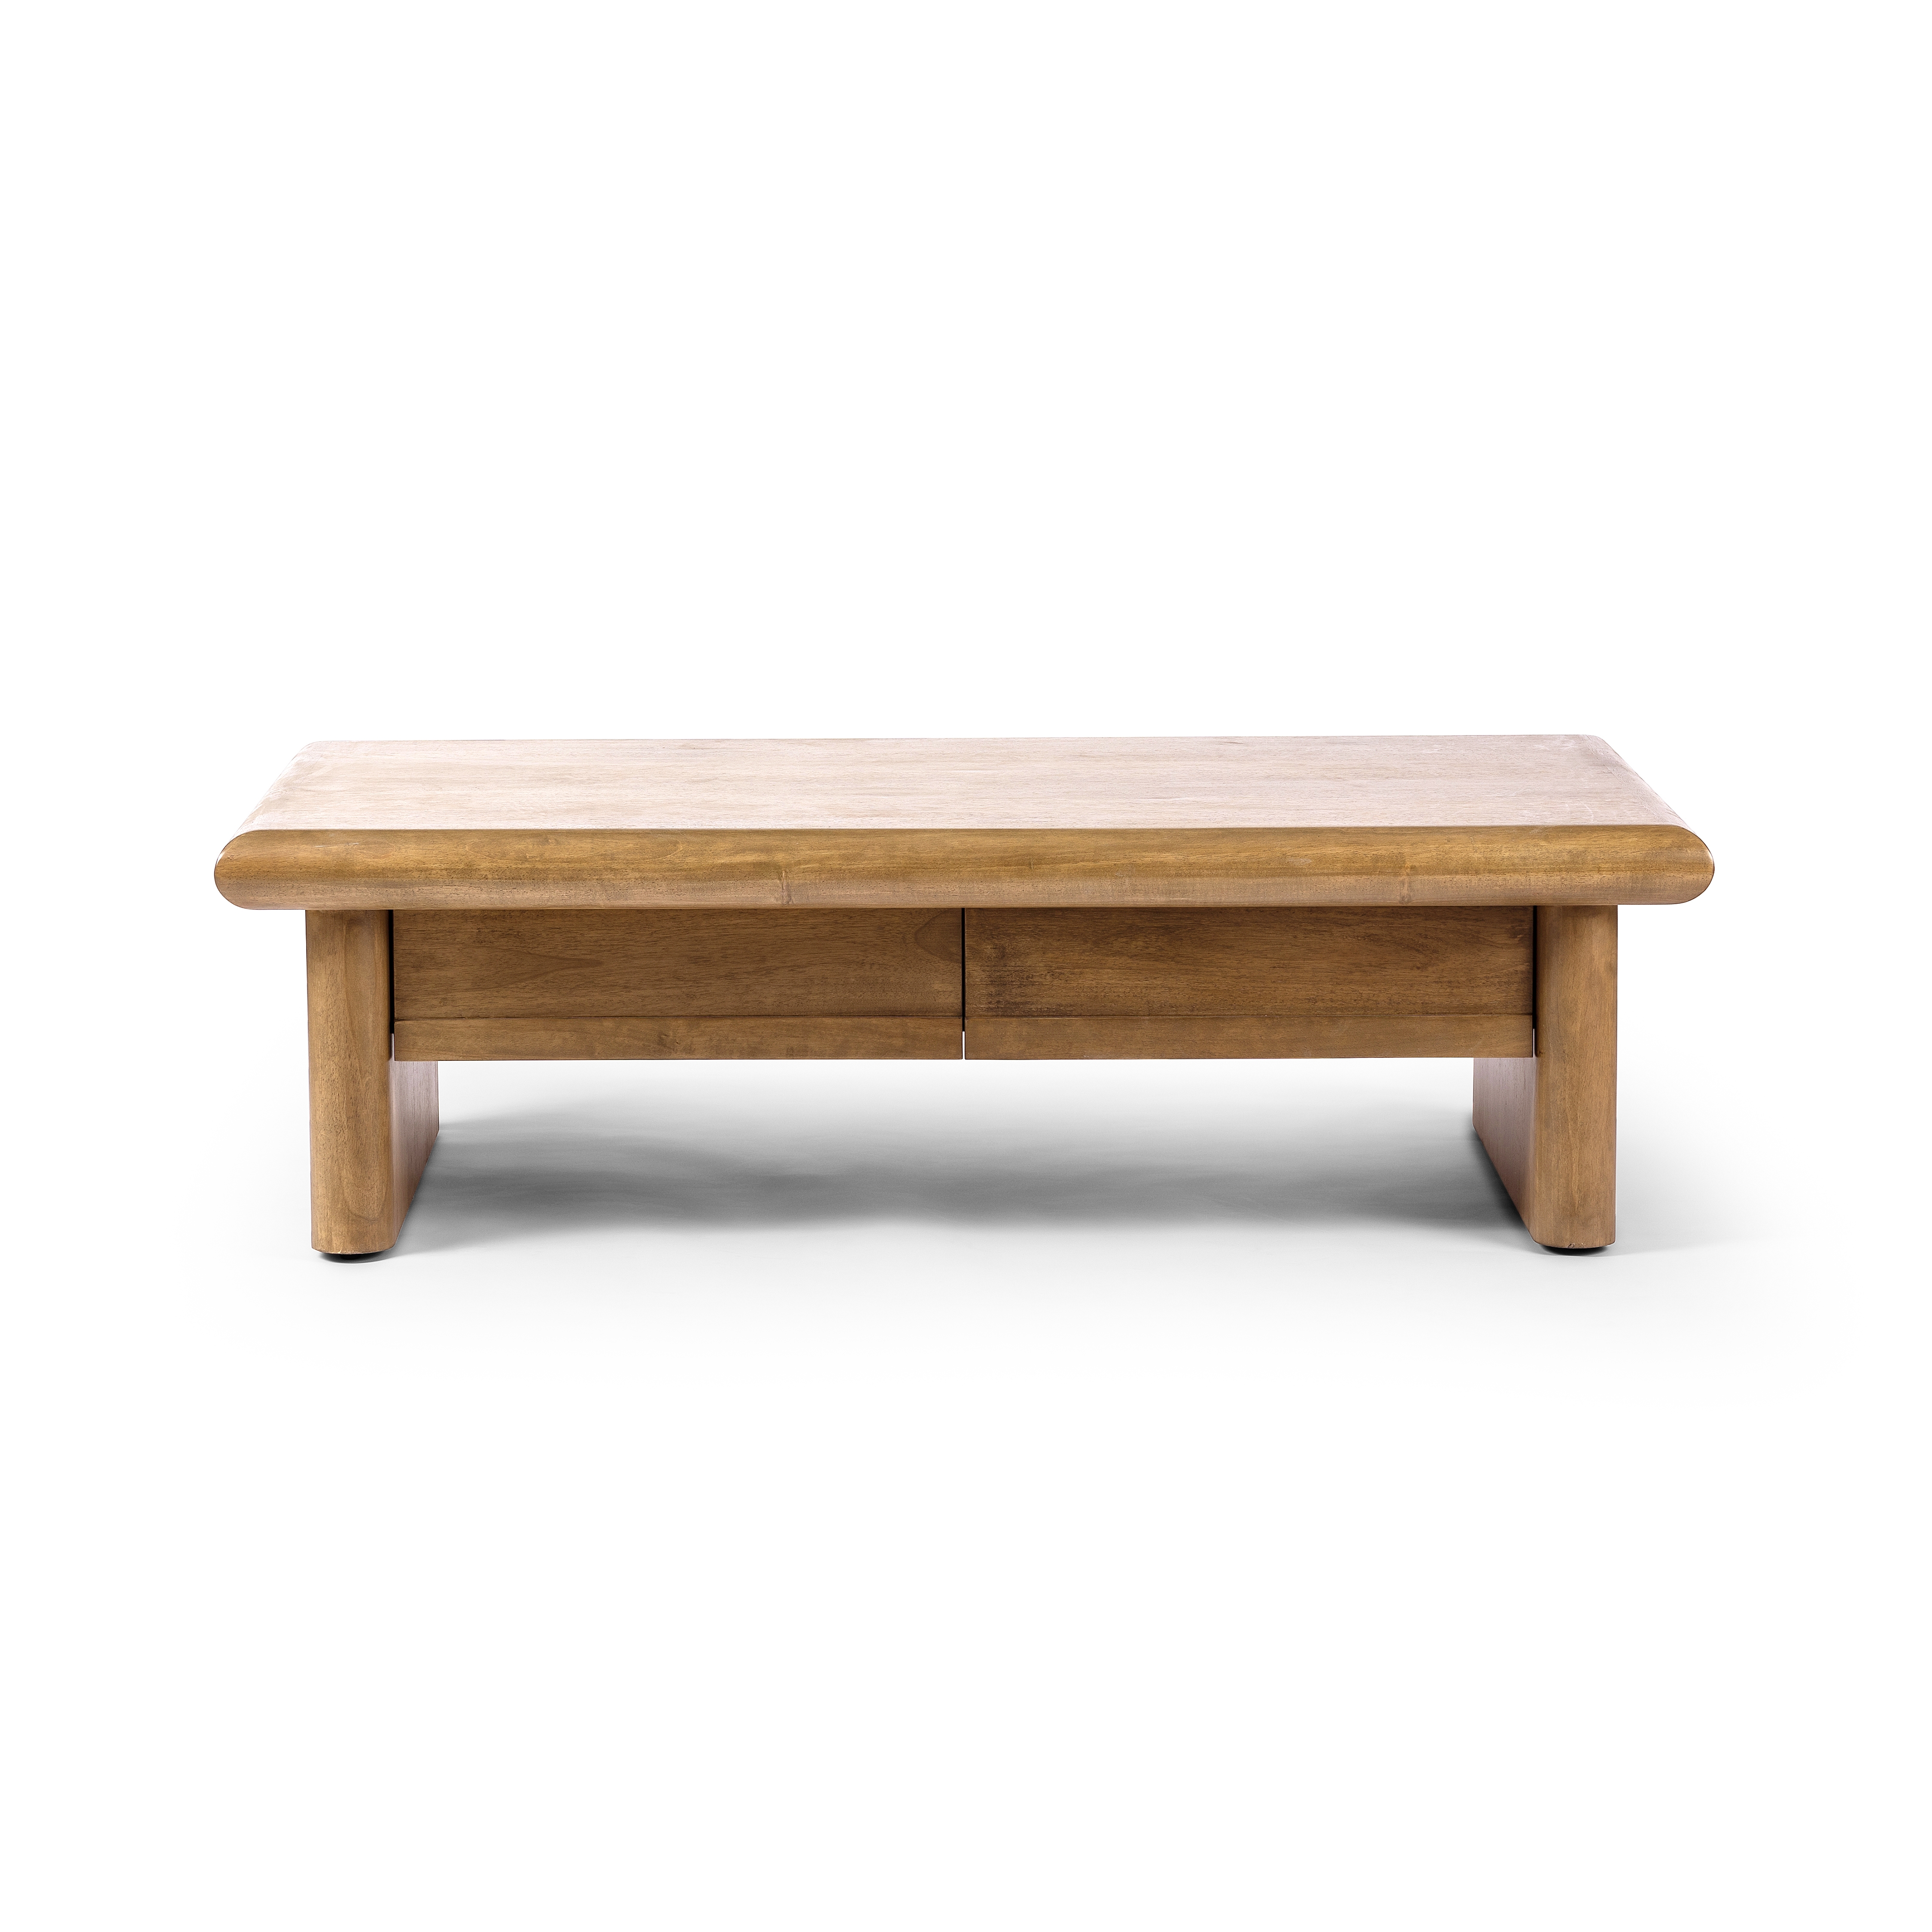 Murray Coffee Table-Weathered Parawood - Image 3